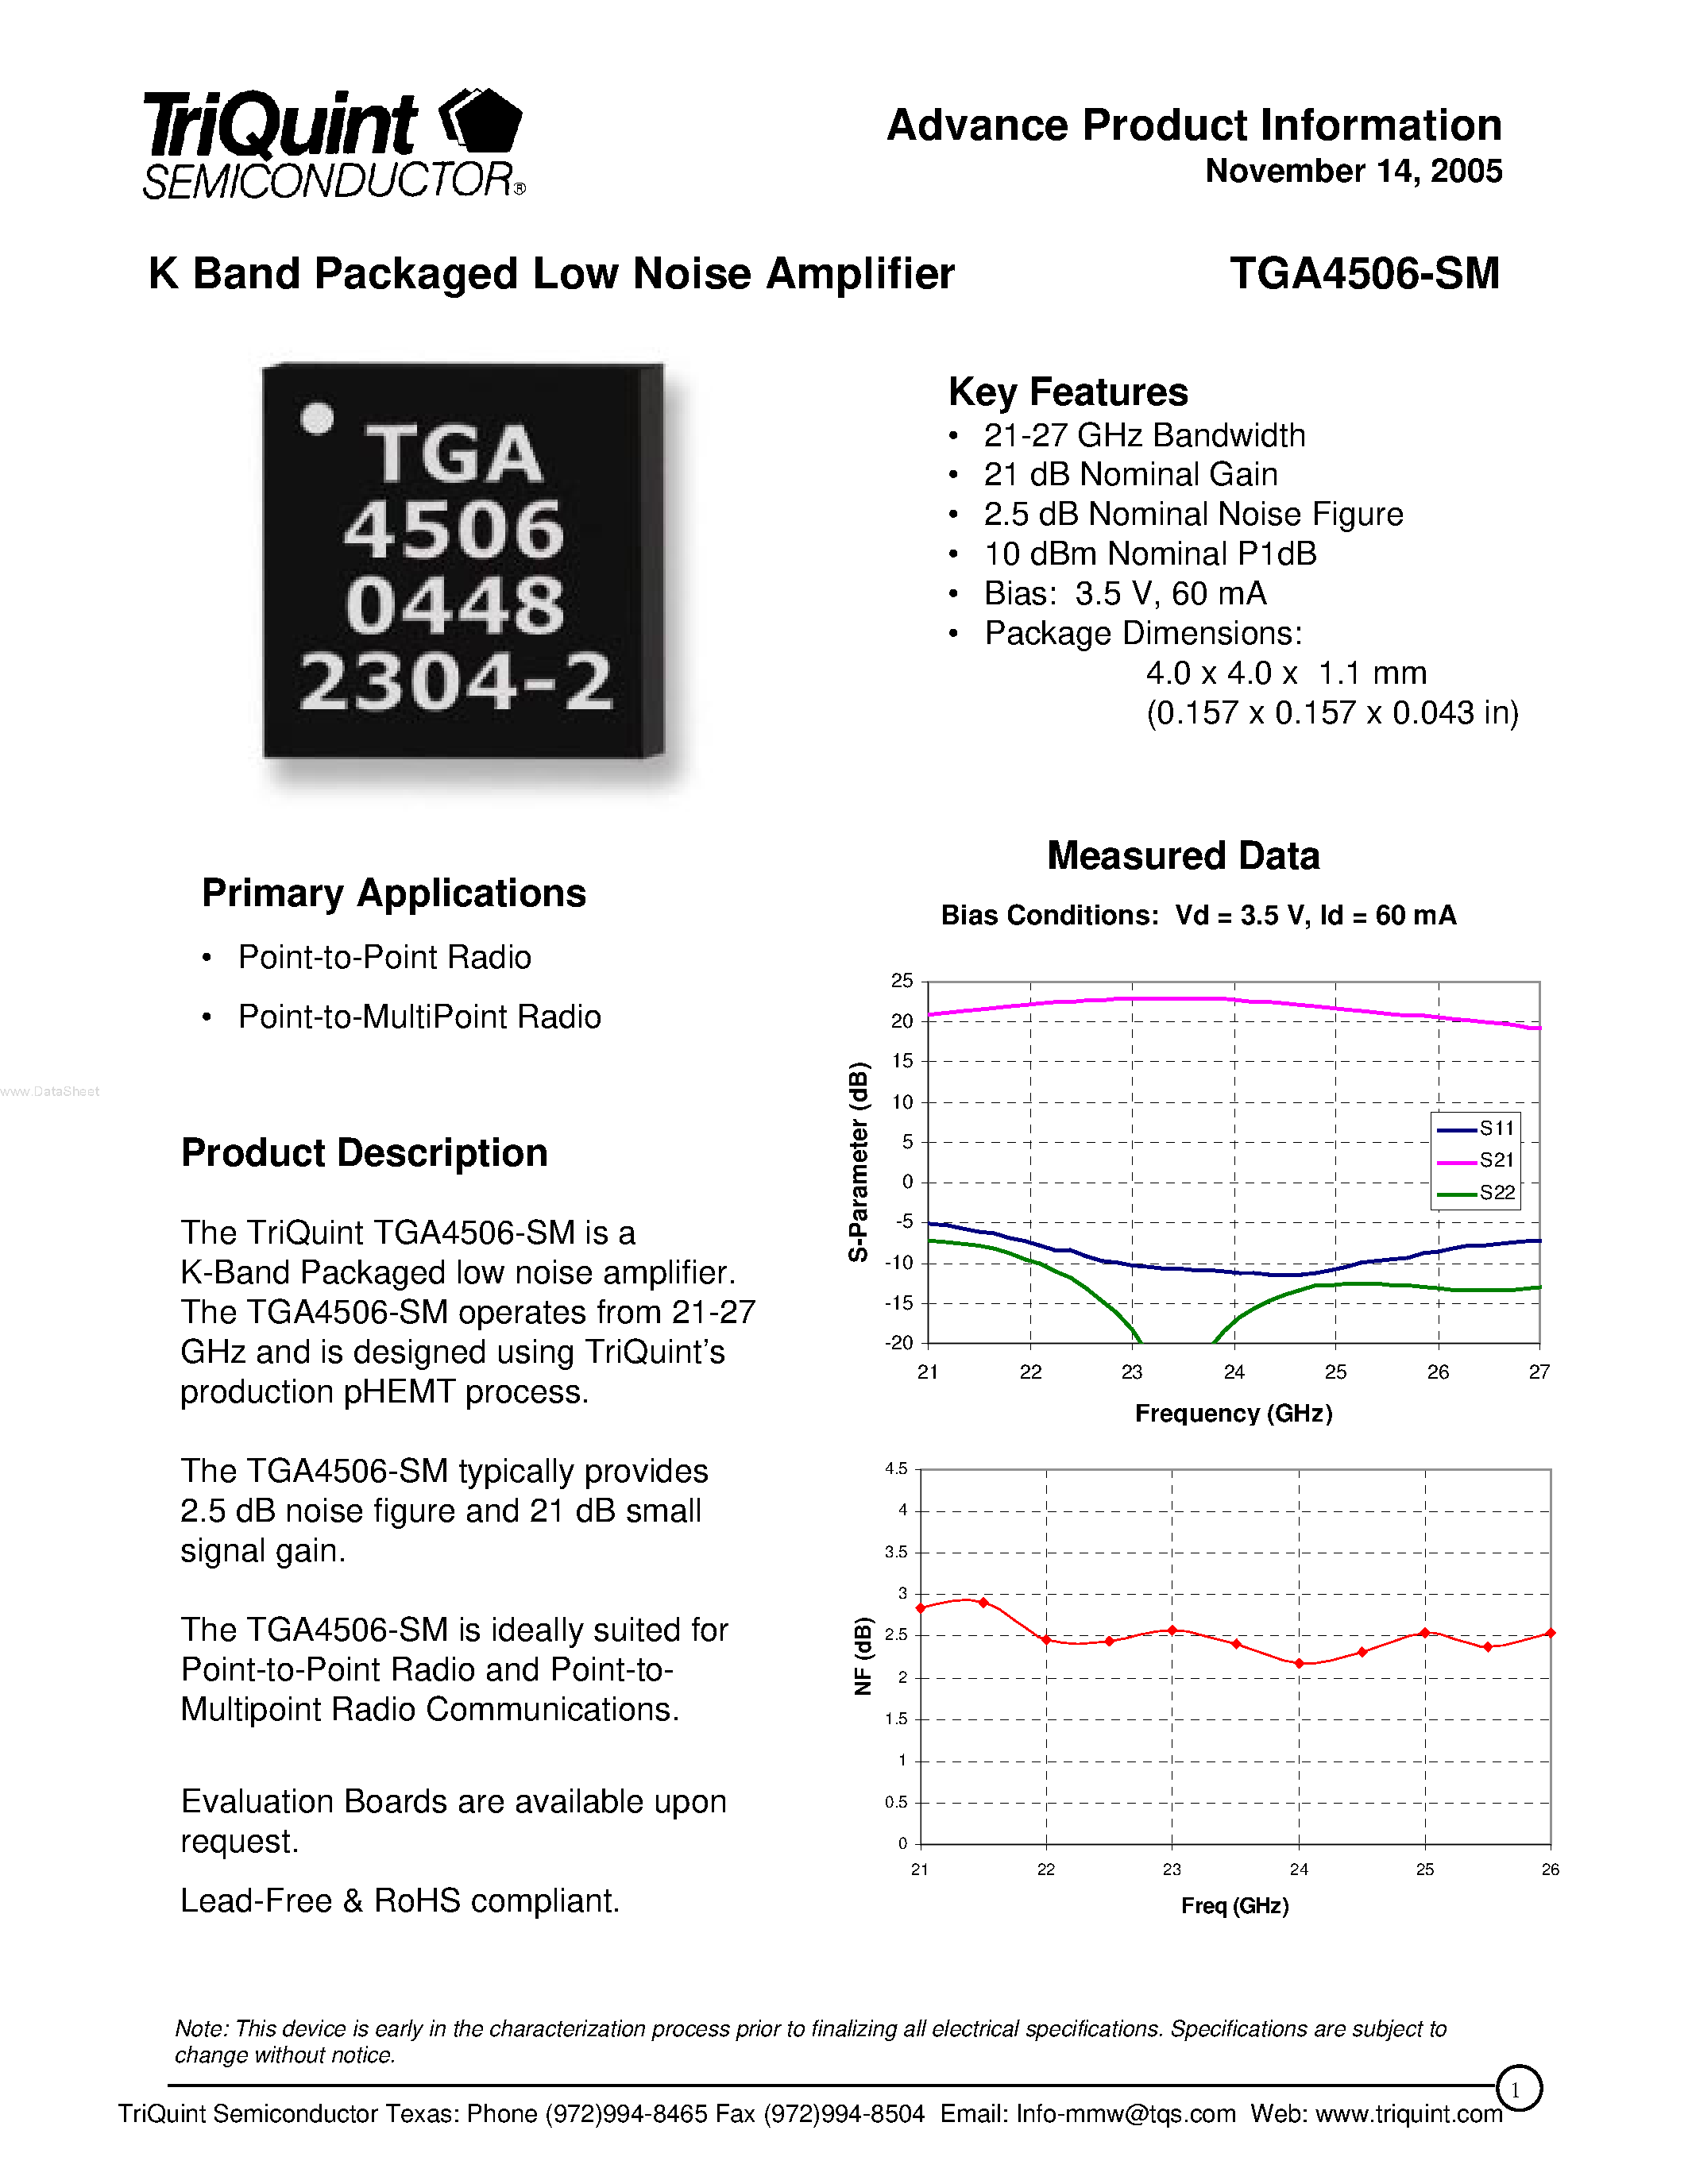 Datasheet TGA4506-SM - K Band Packaged Low Noise Amplifier page 1